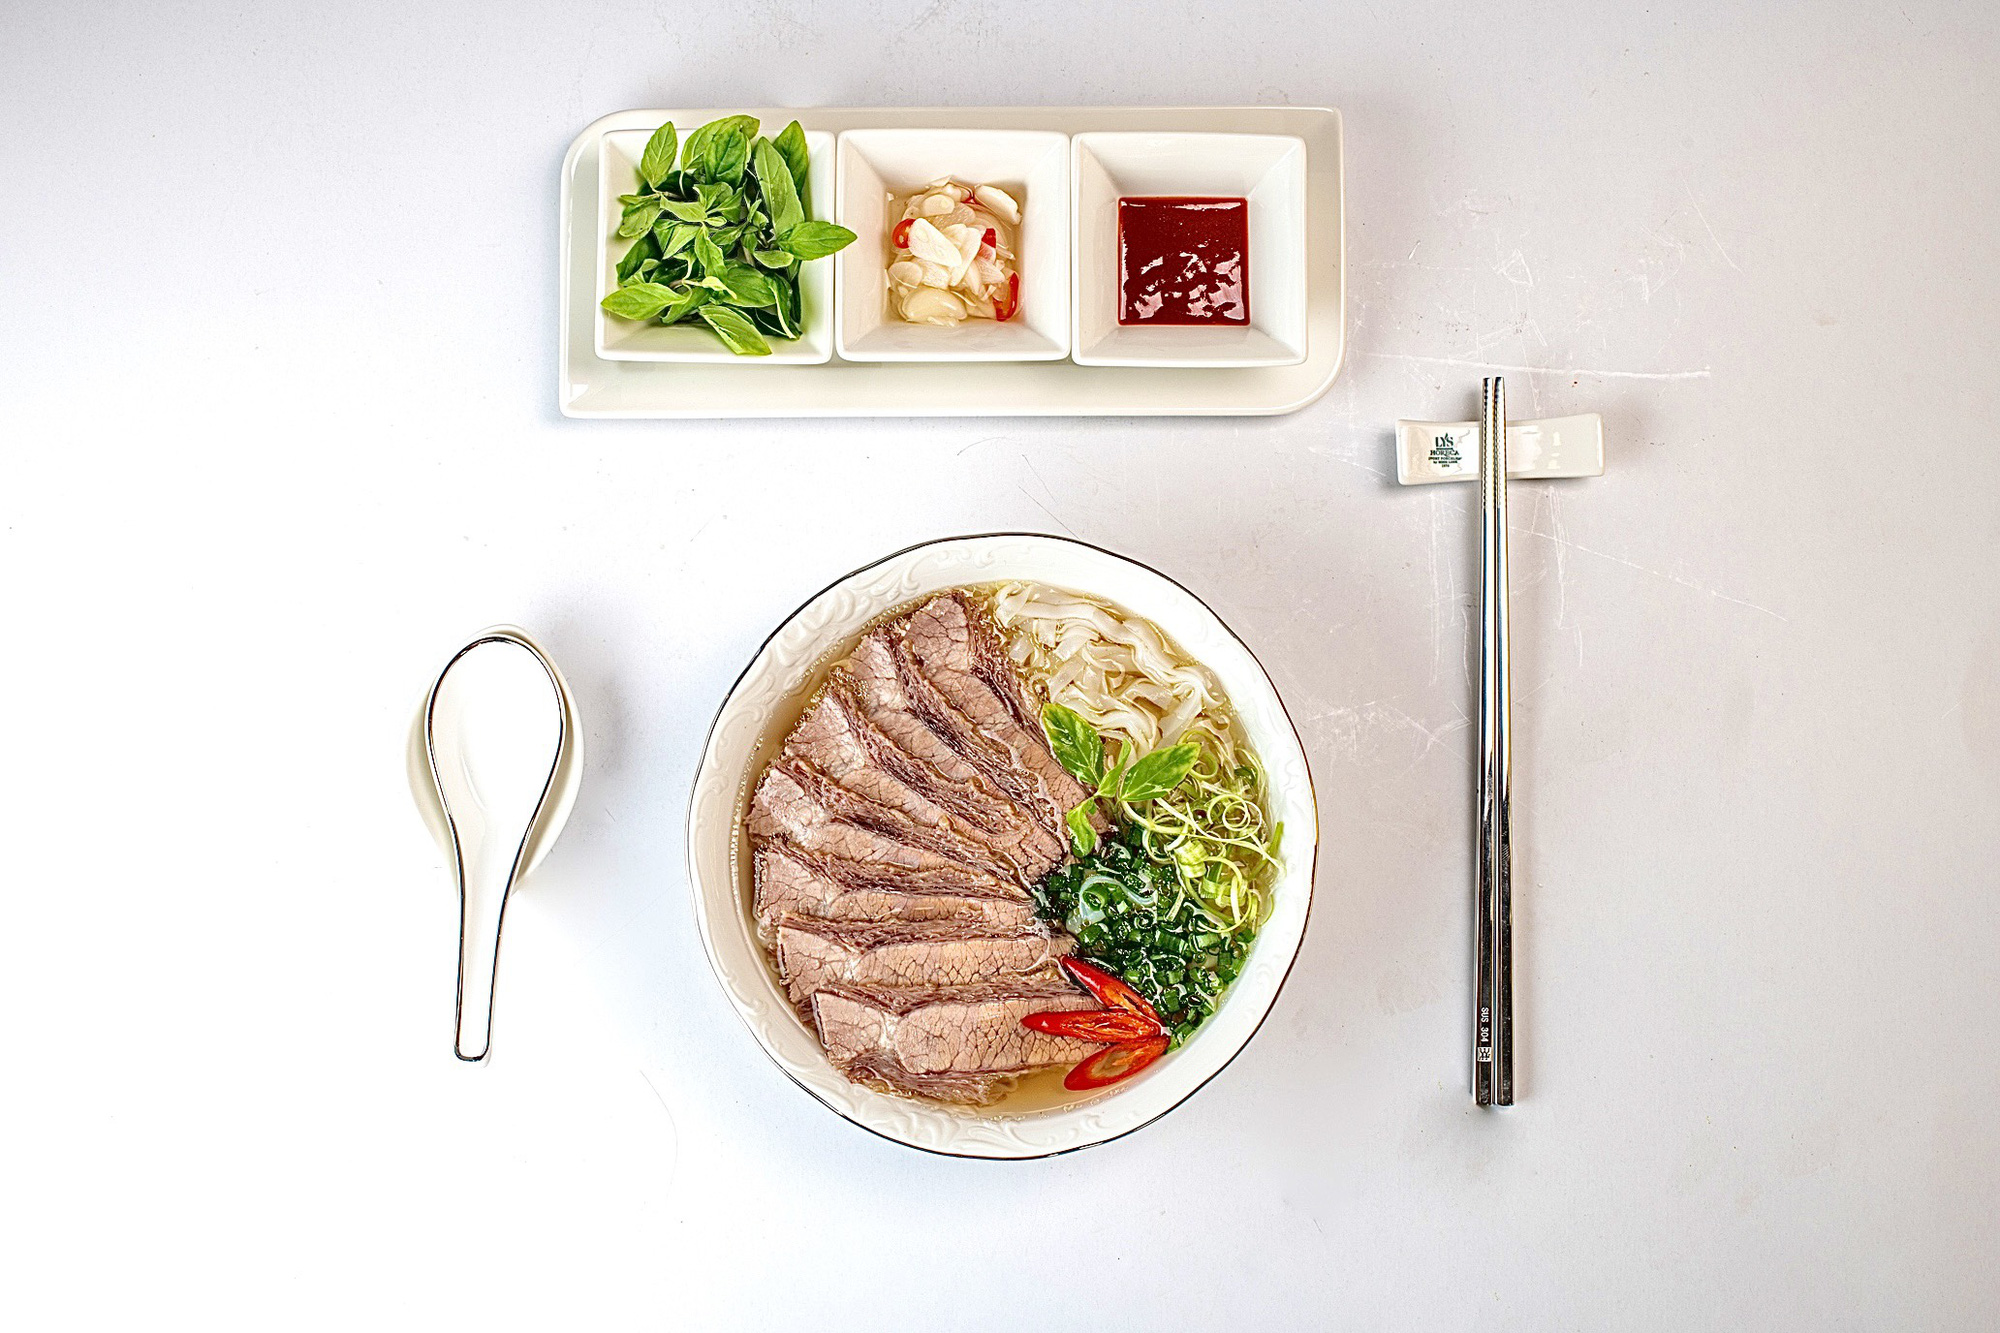 Enterprise offers frozen Vietnamese dishes with freshness, authenticity